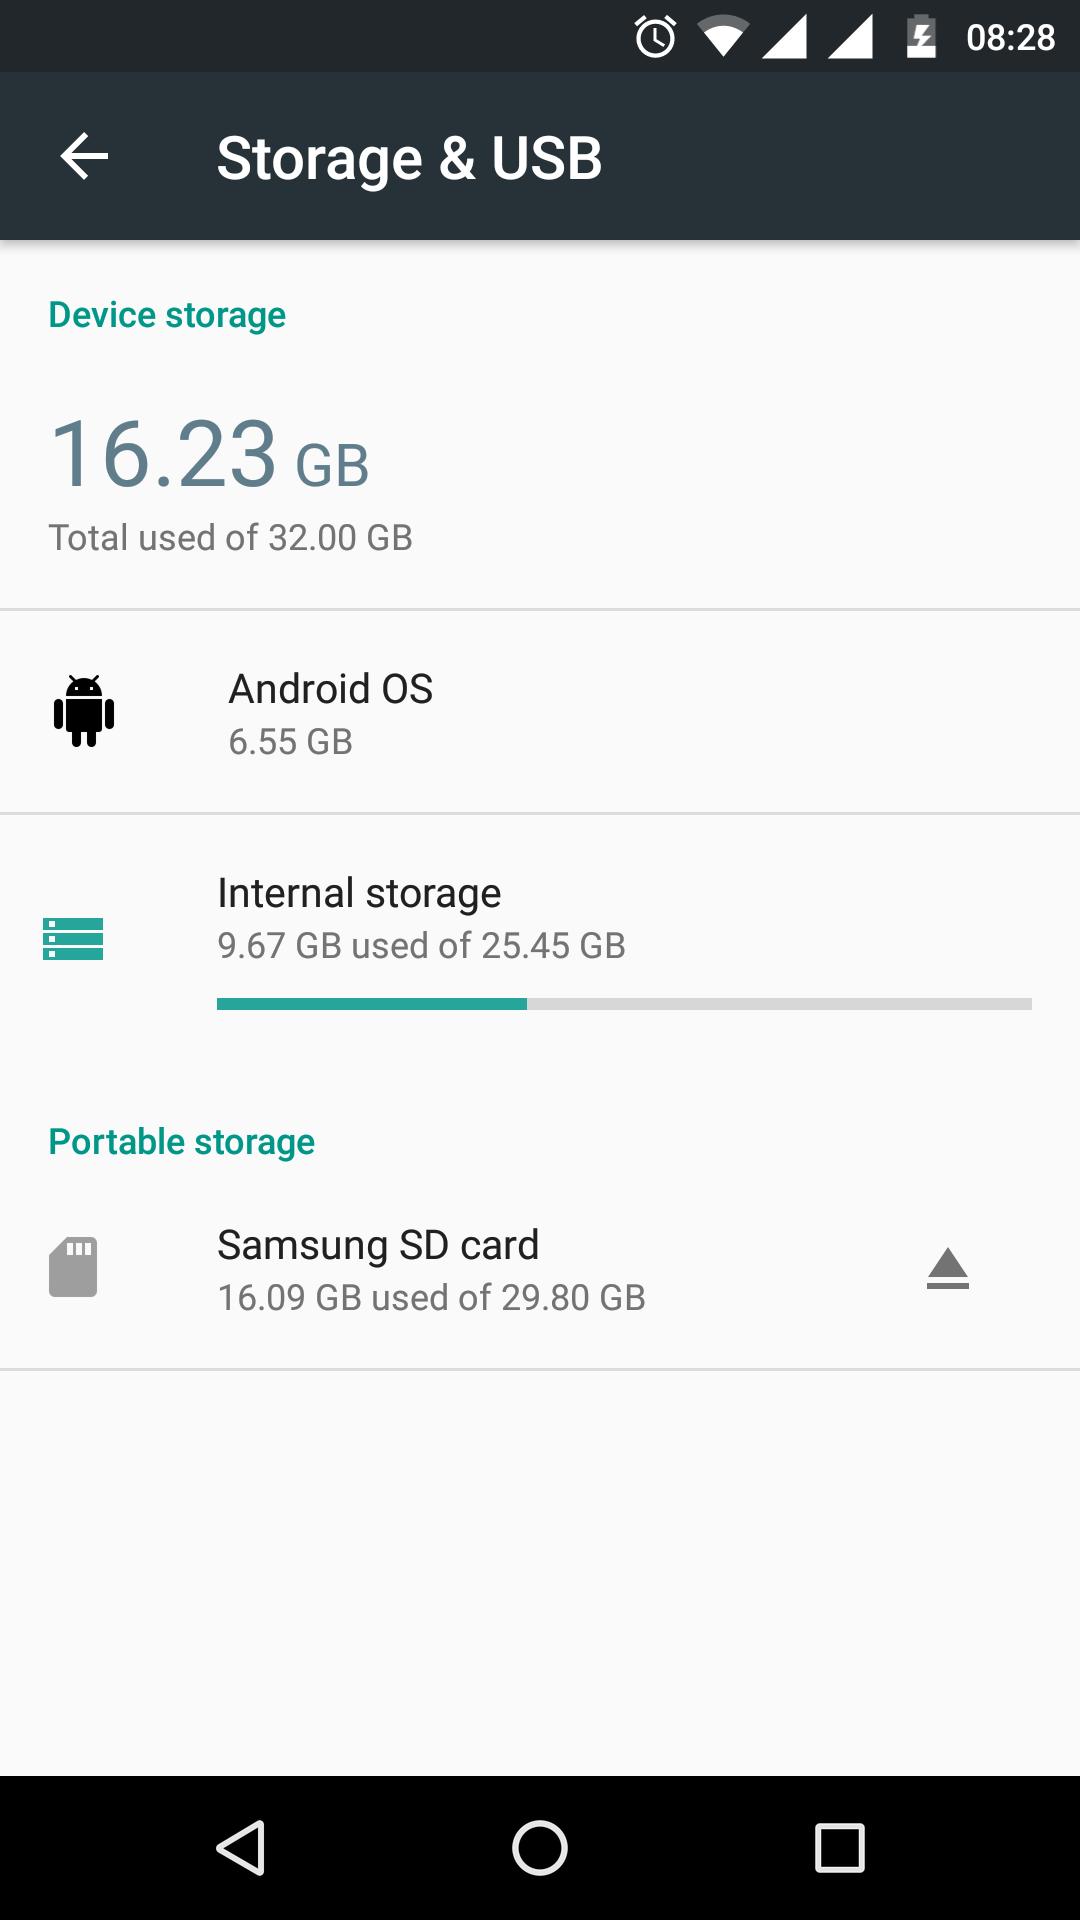 Comment utiliser le stockage adoptable sur Android 6.0 Marshmallow